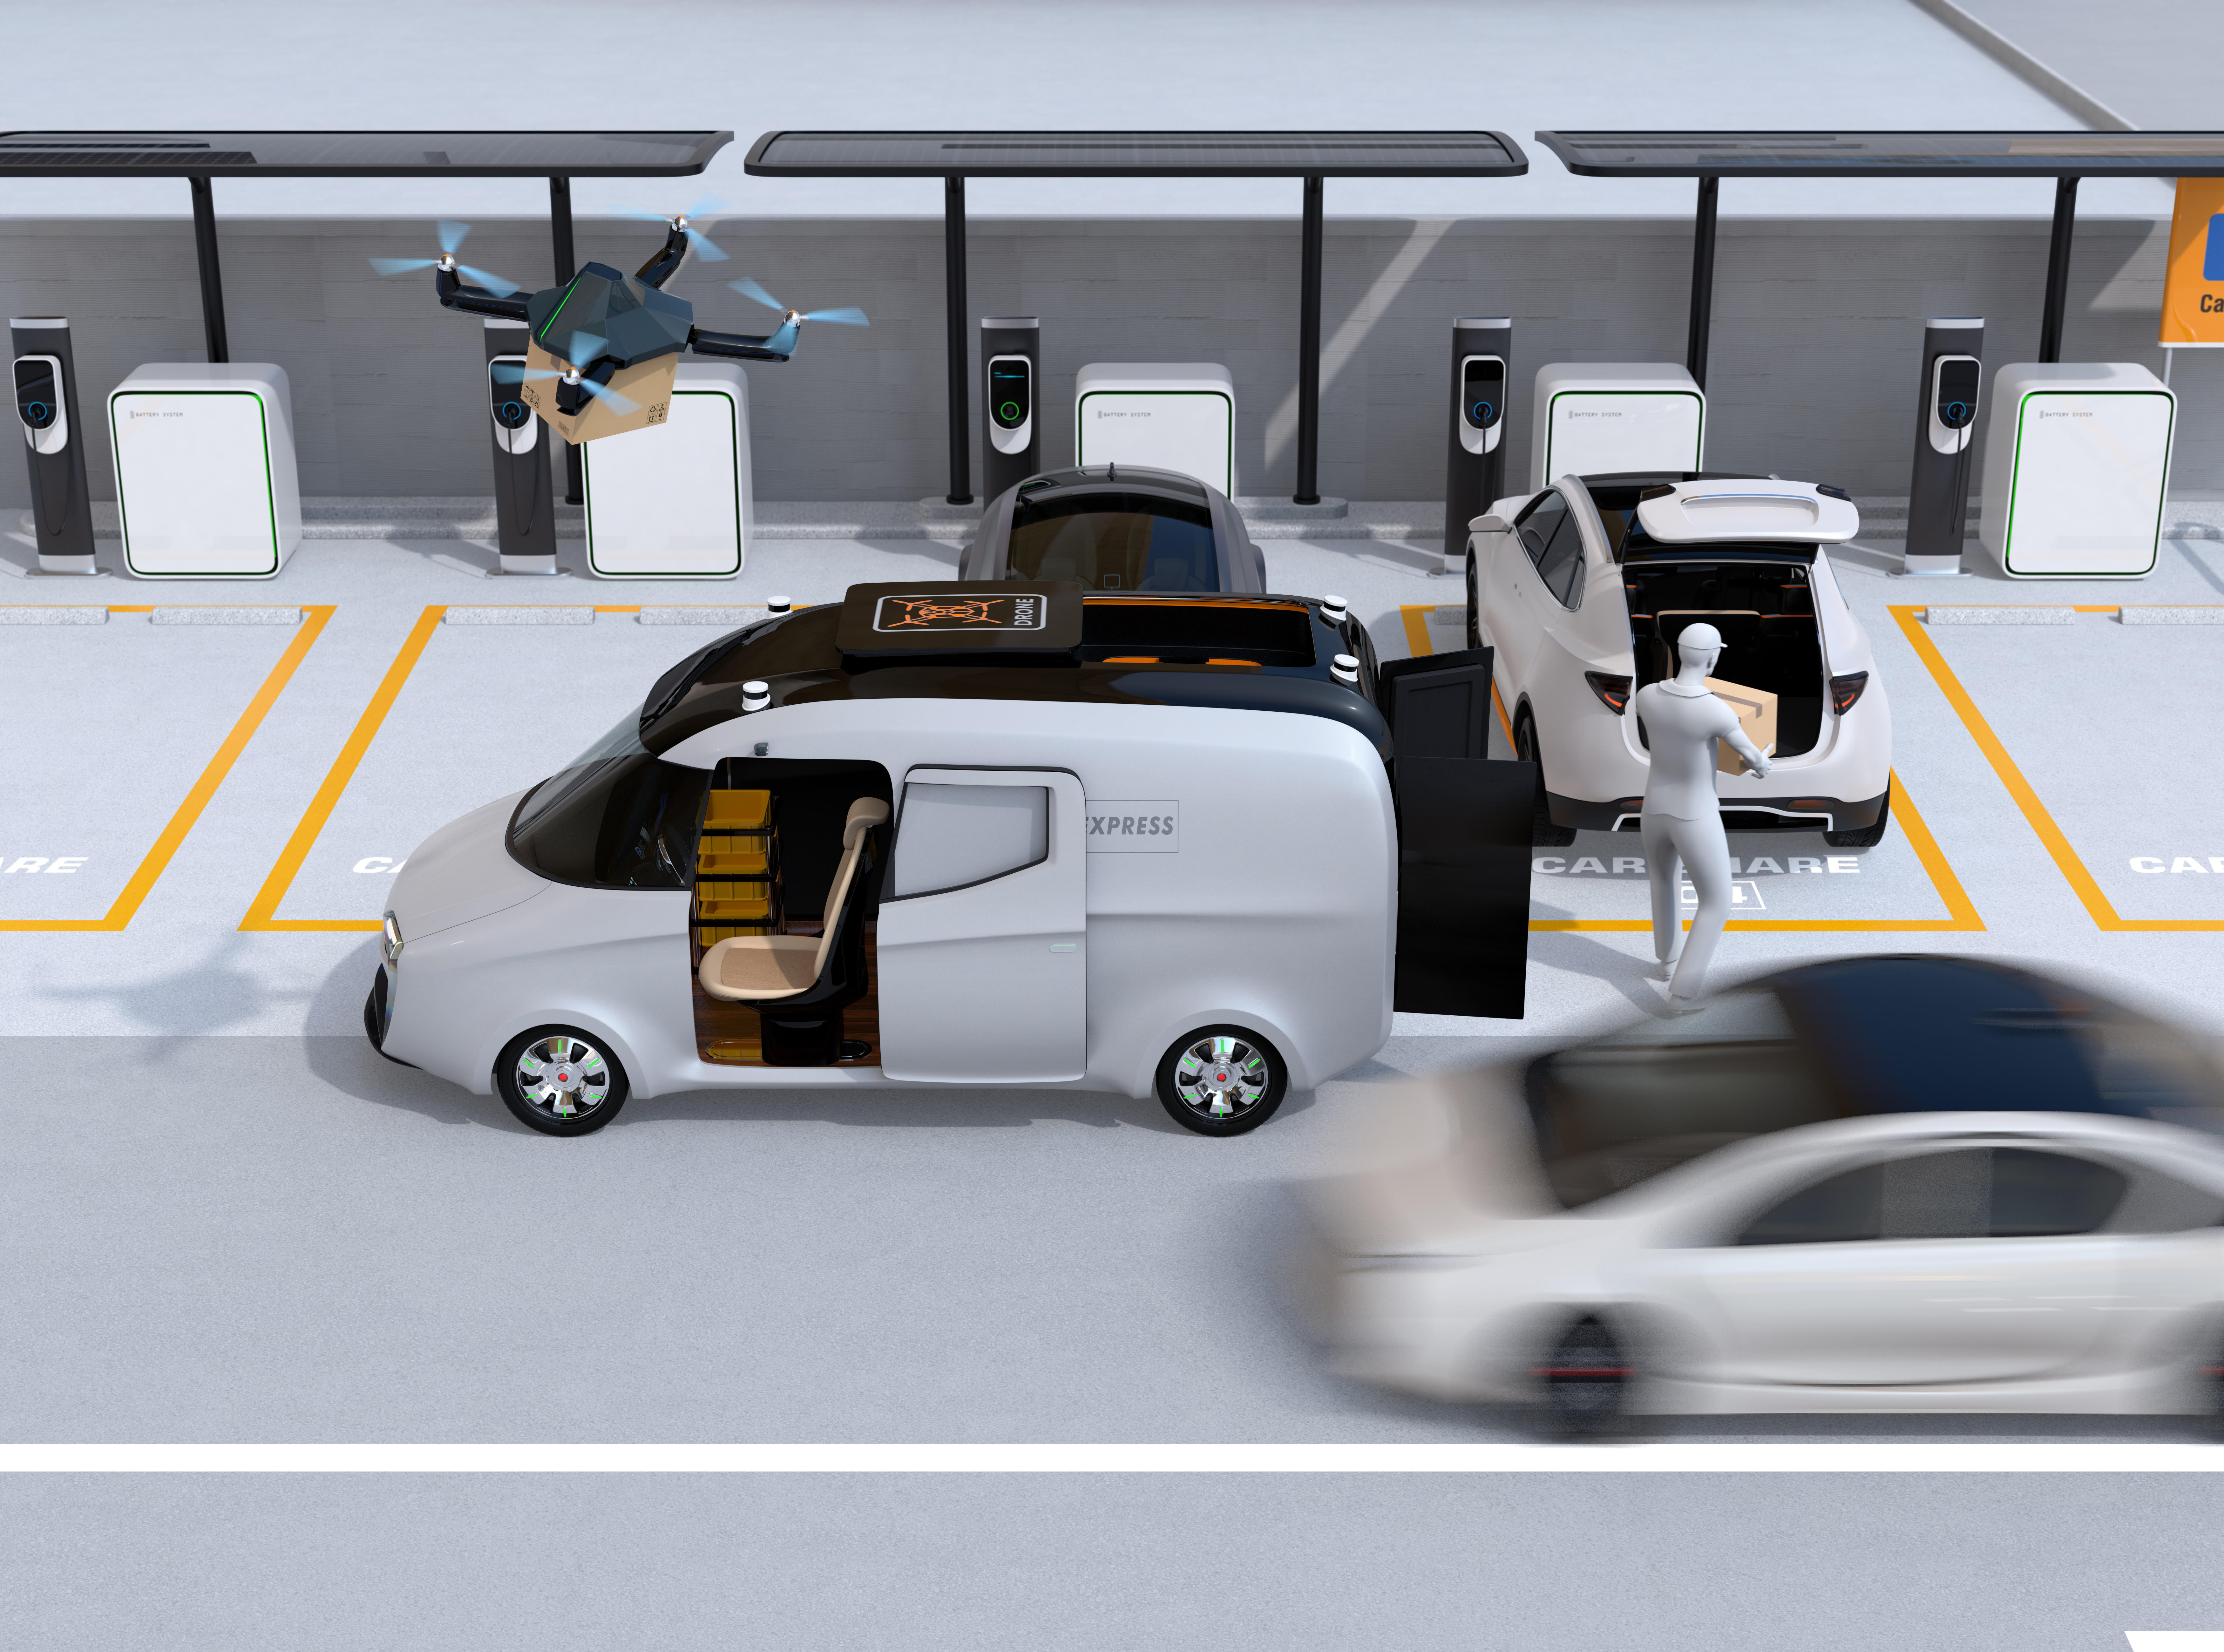 Plans are to commercialize composites in e-mobility applications.